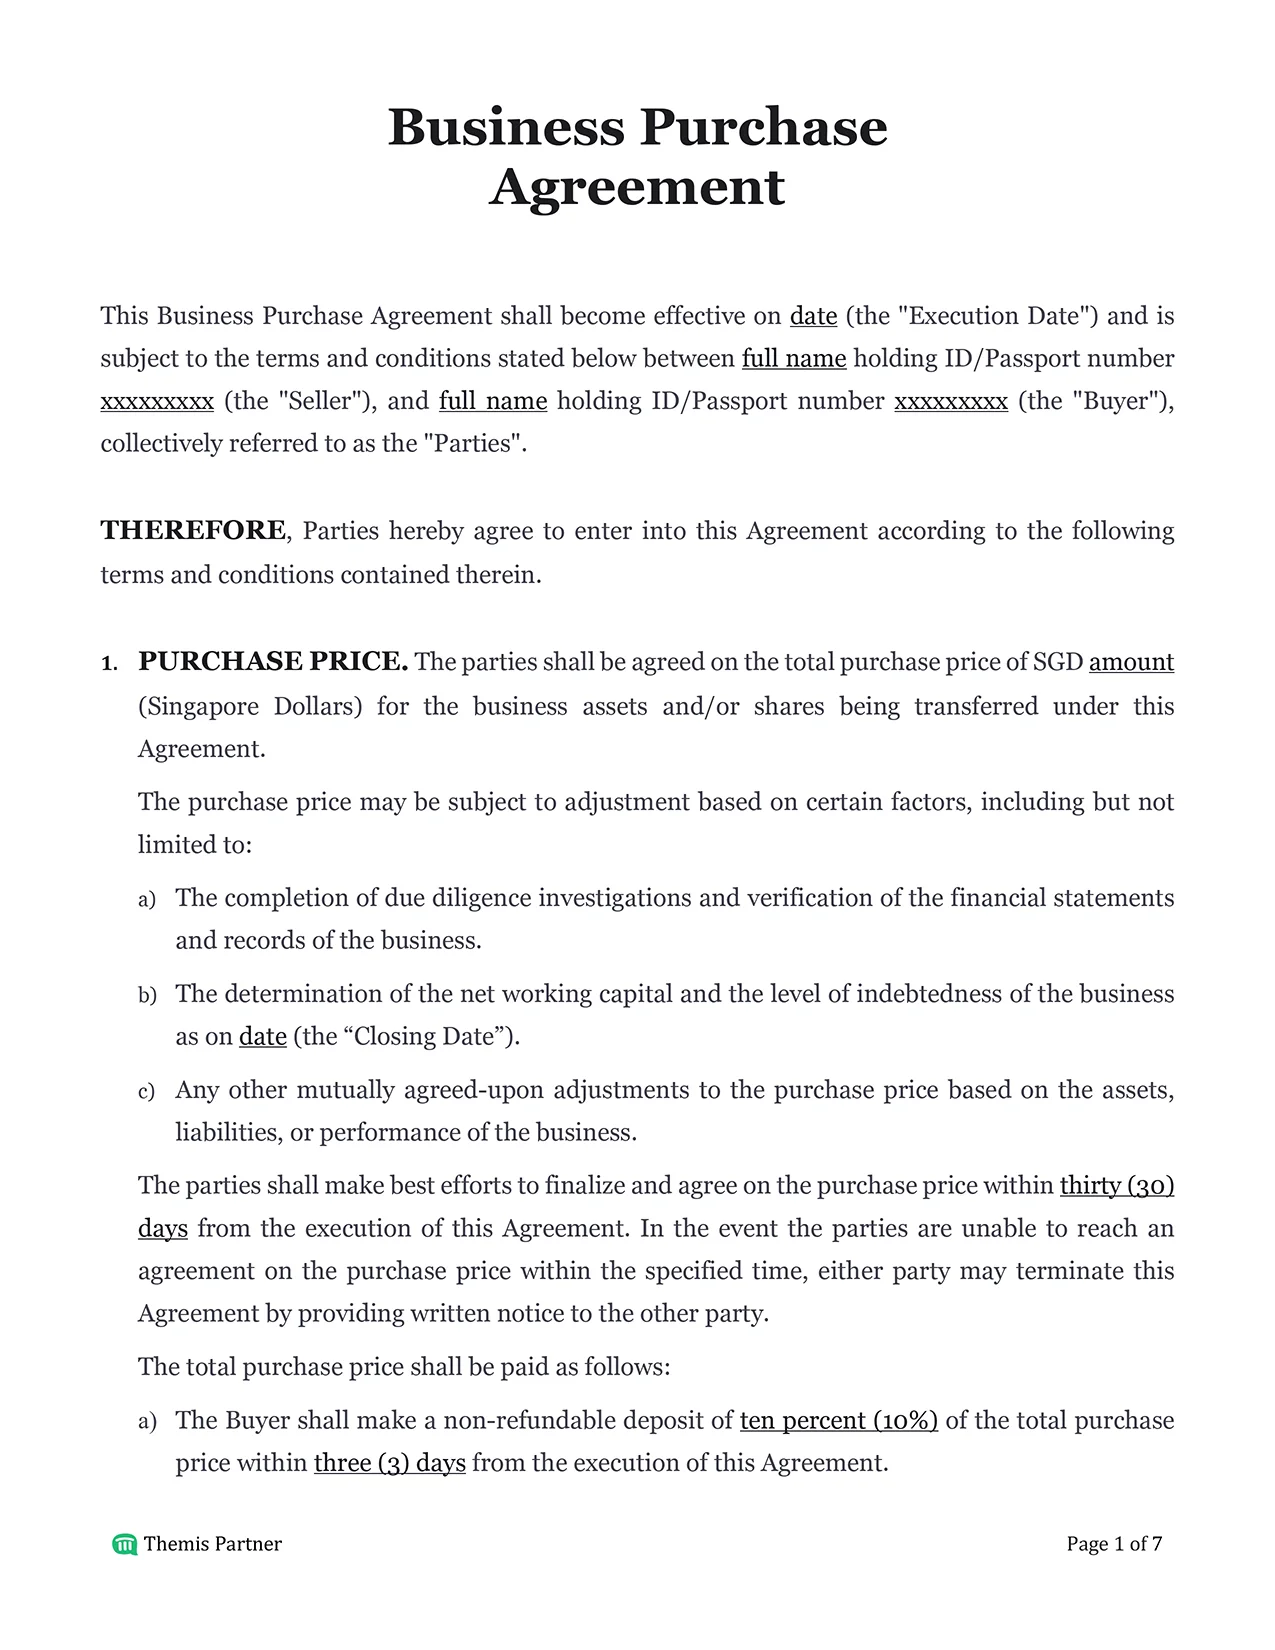 Business purchase agreement Singapore 1